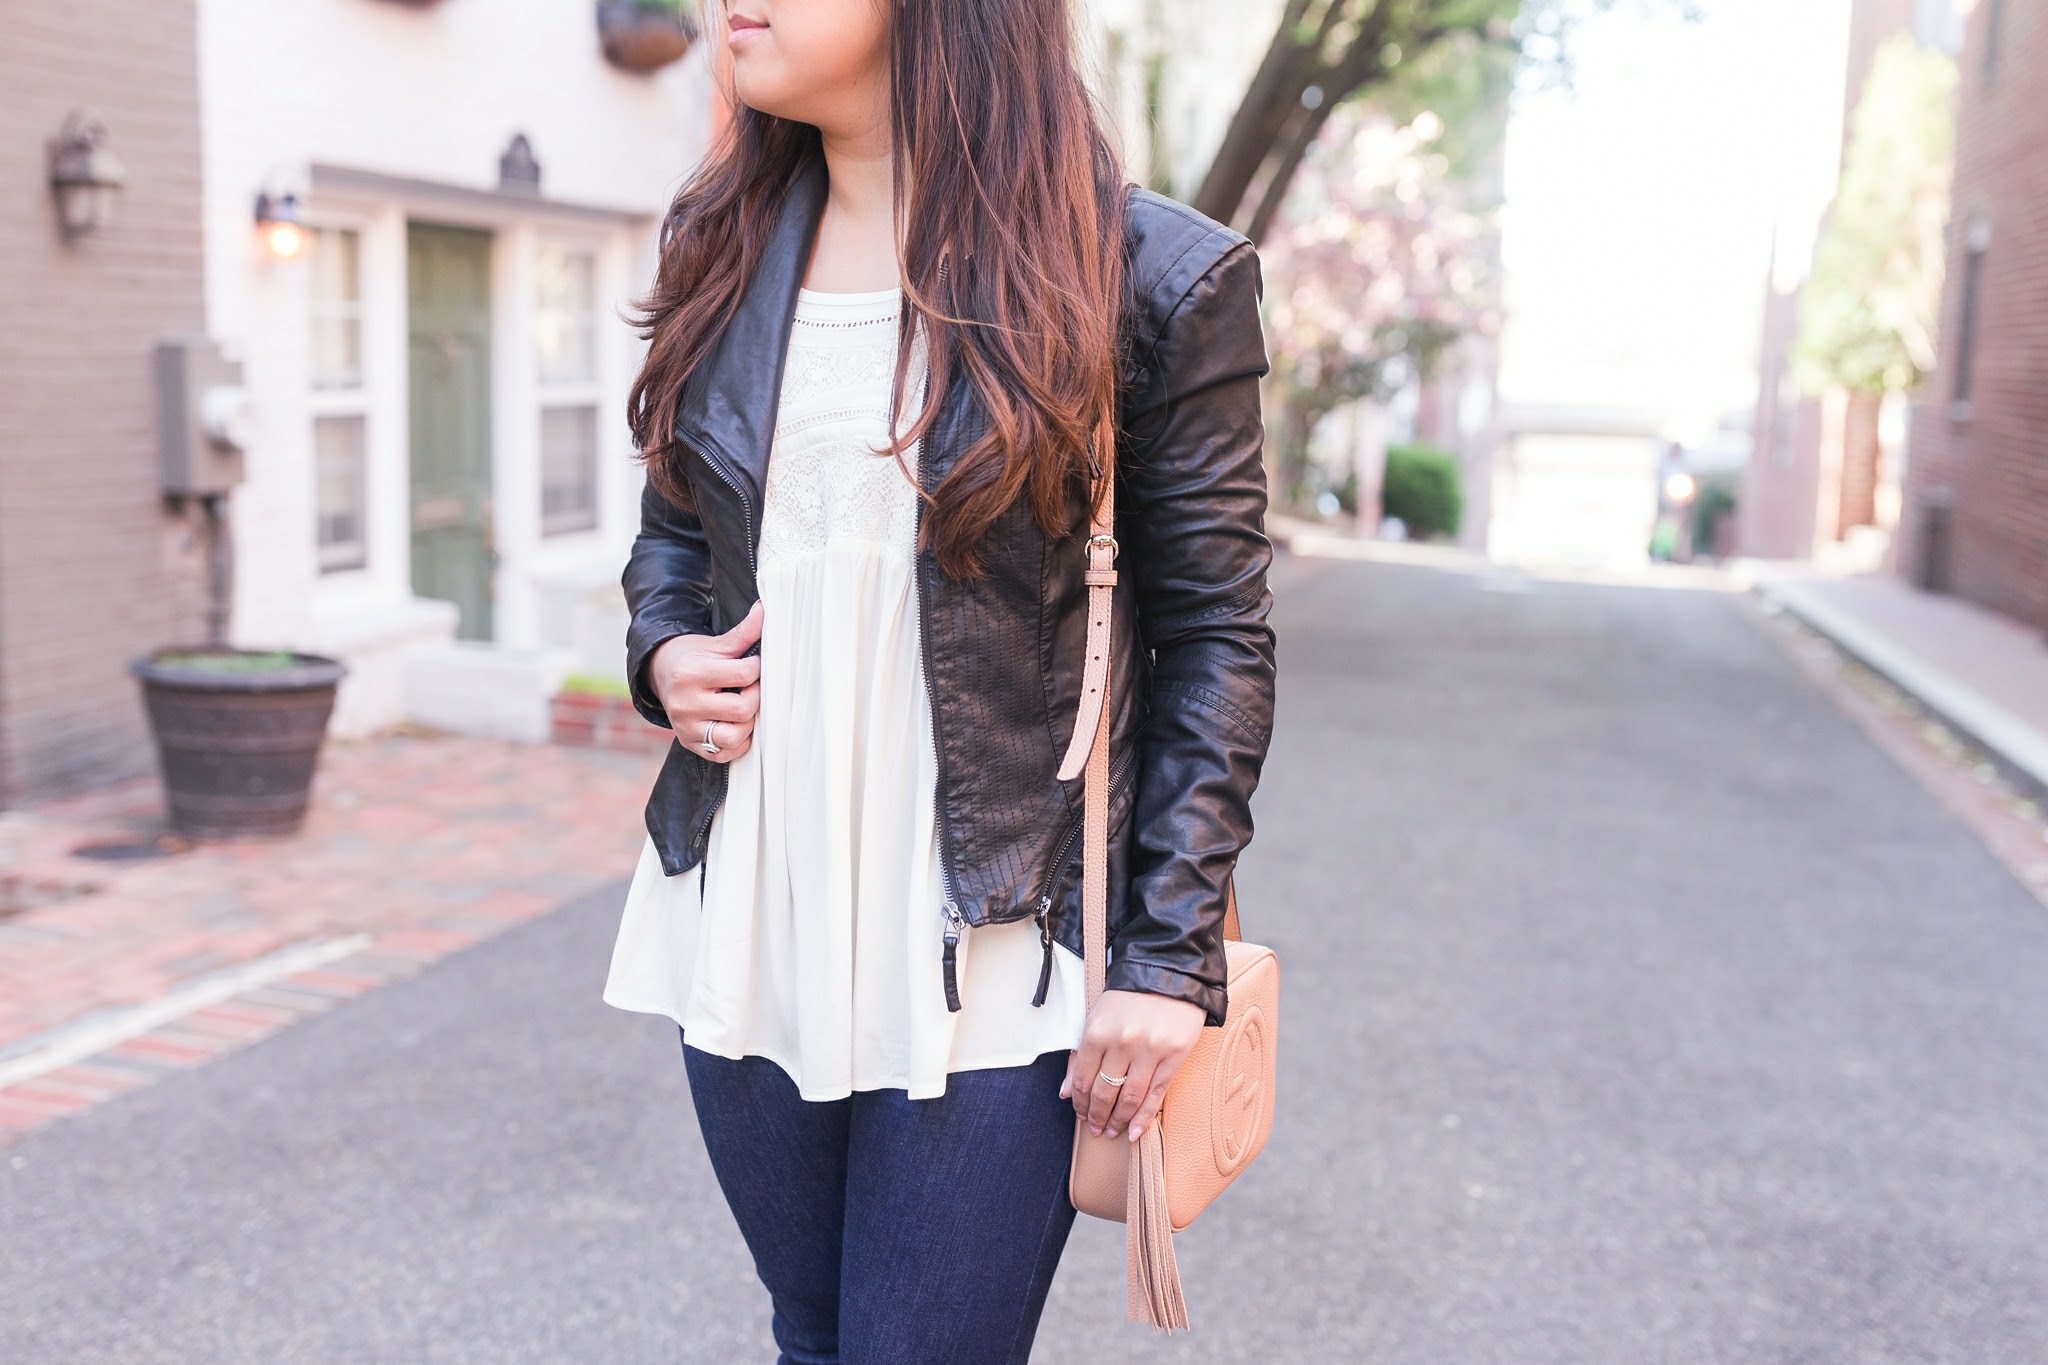 Perfect Transitional Jacket BLANKNYC - Stylista Esquire - @stylistaesquire